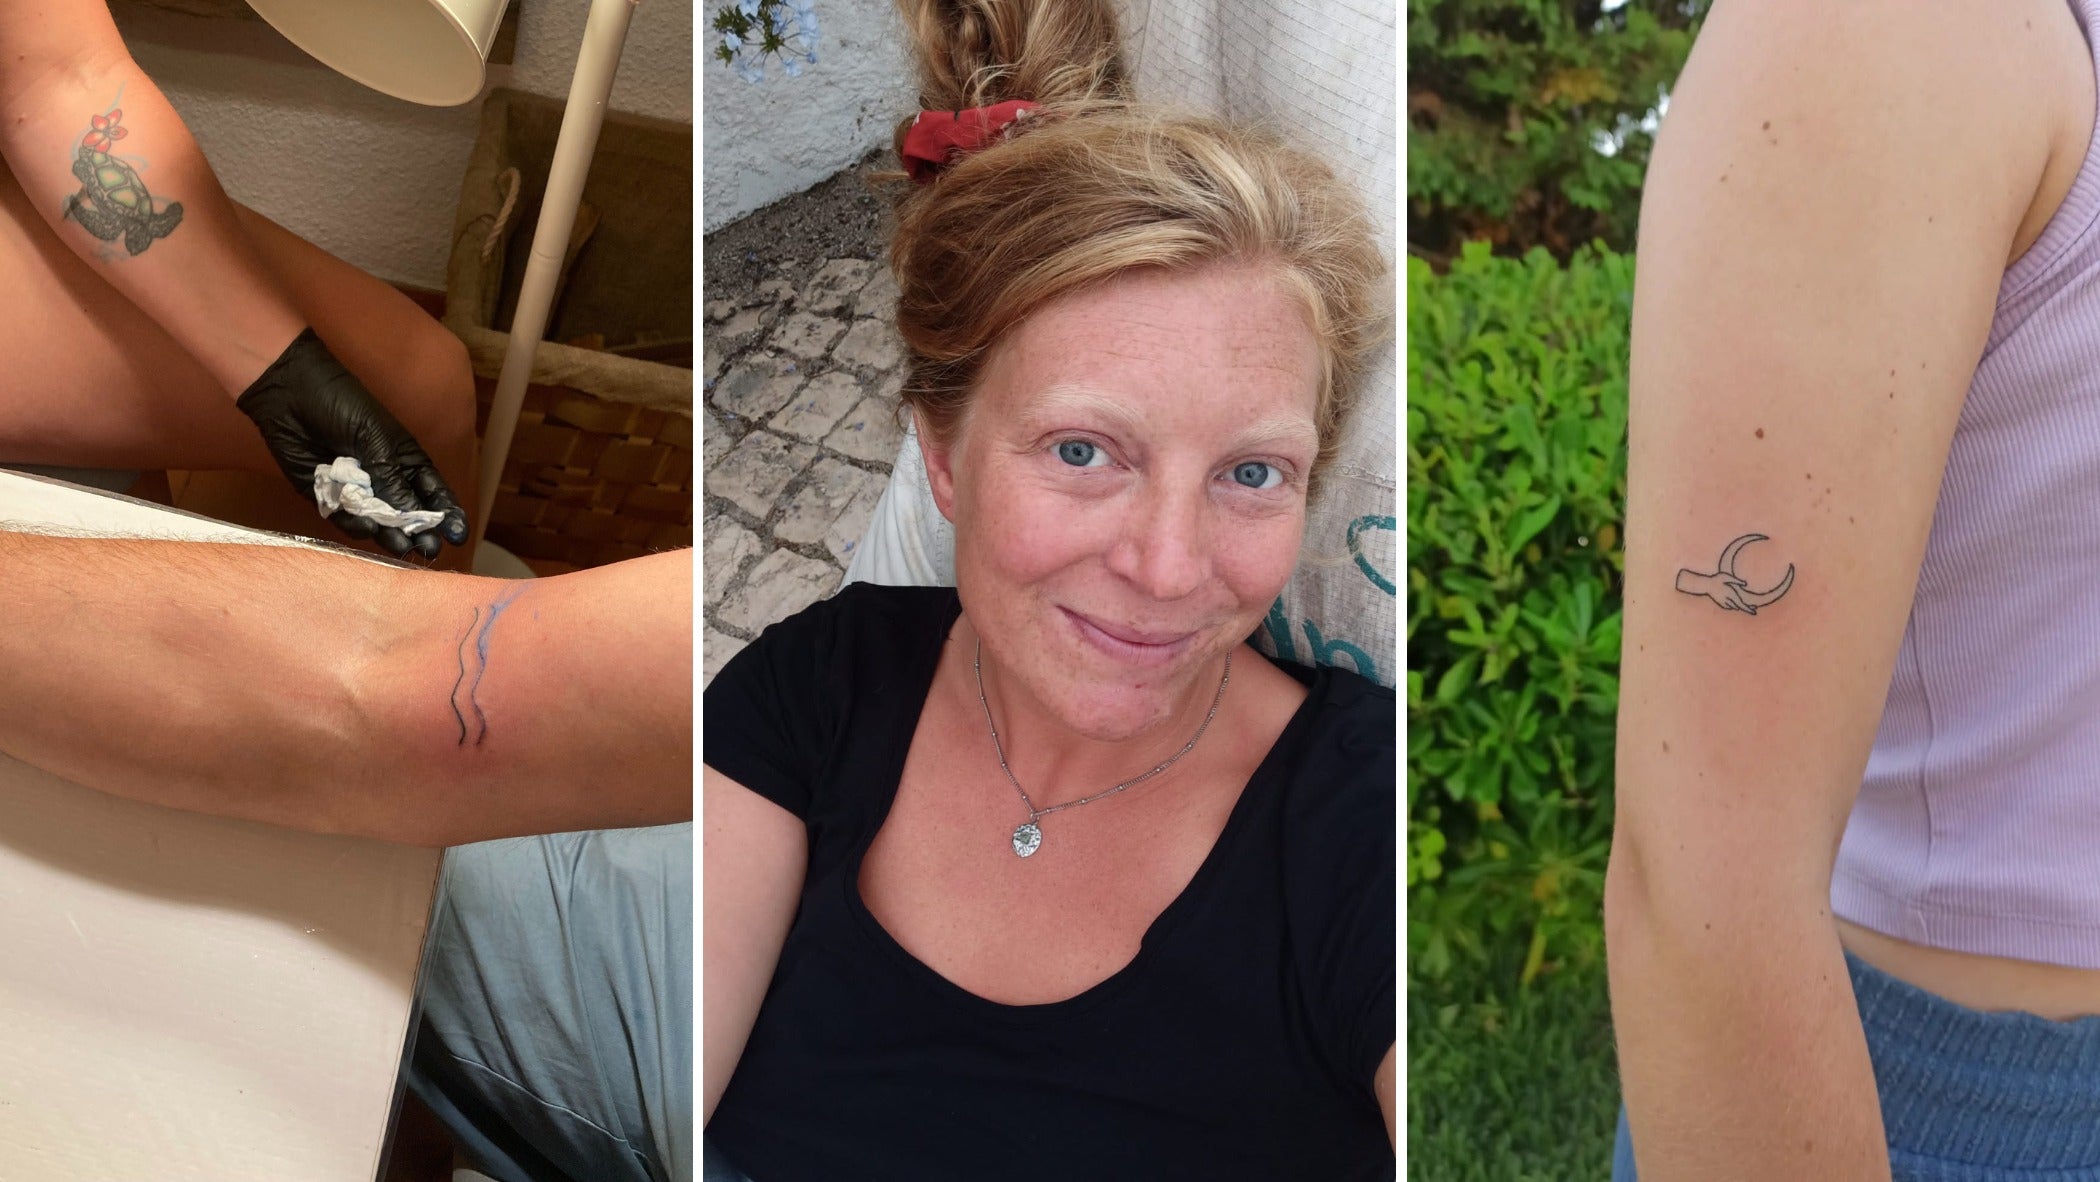 Photos of a blue and black wave tattoo, Awina (centre) and a finished hand and moon tattoo (far right)